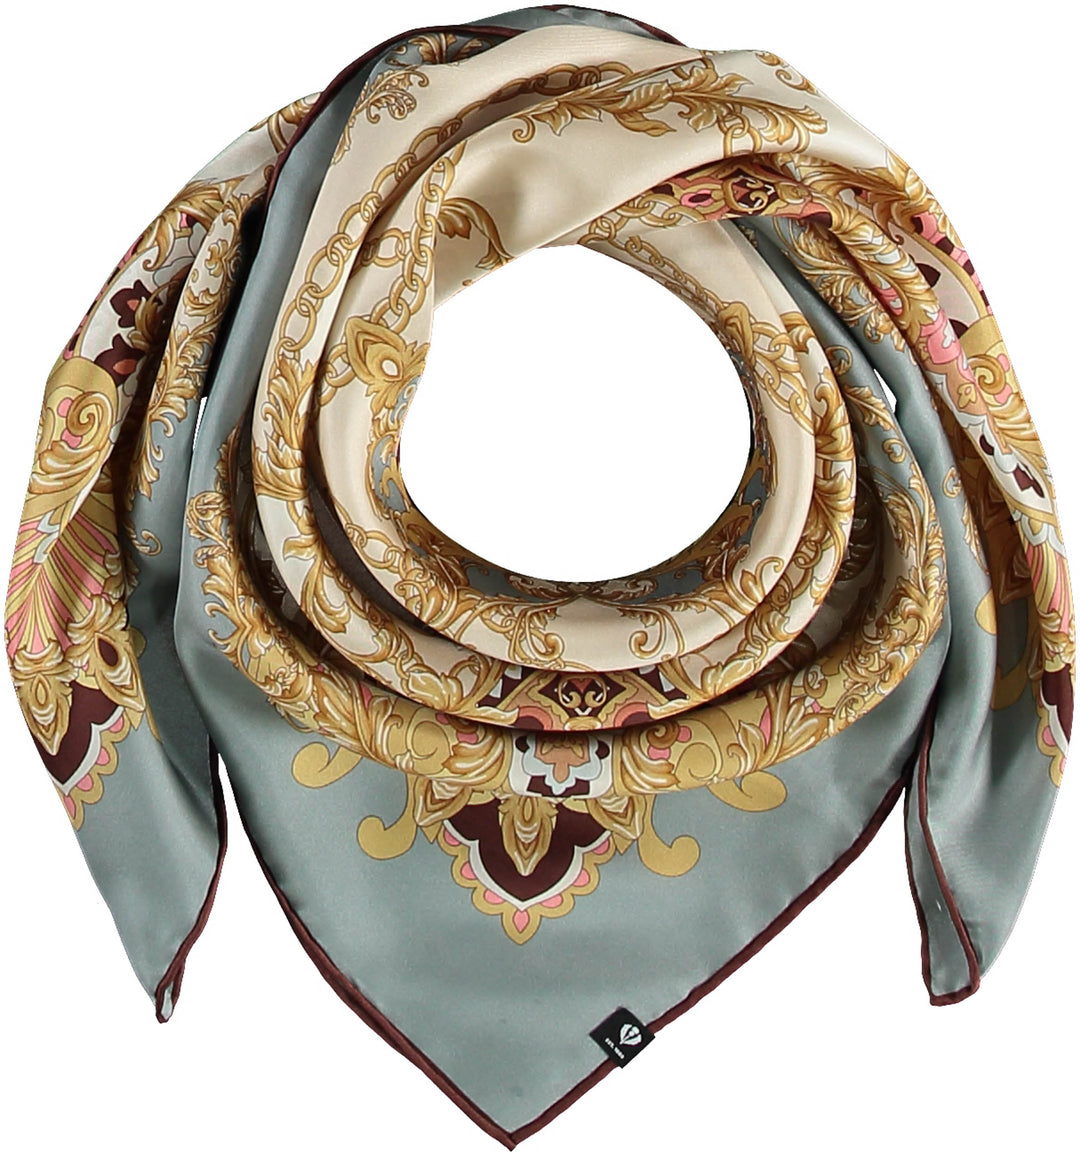 lv scarf women - Buy lv scarf women with free shipping on AliExpress